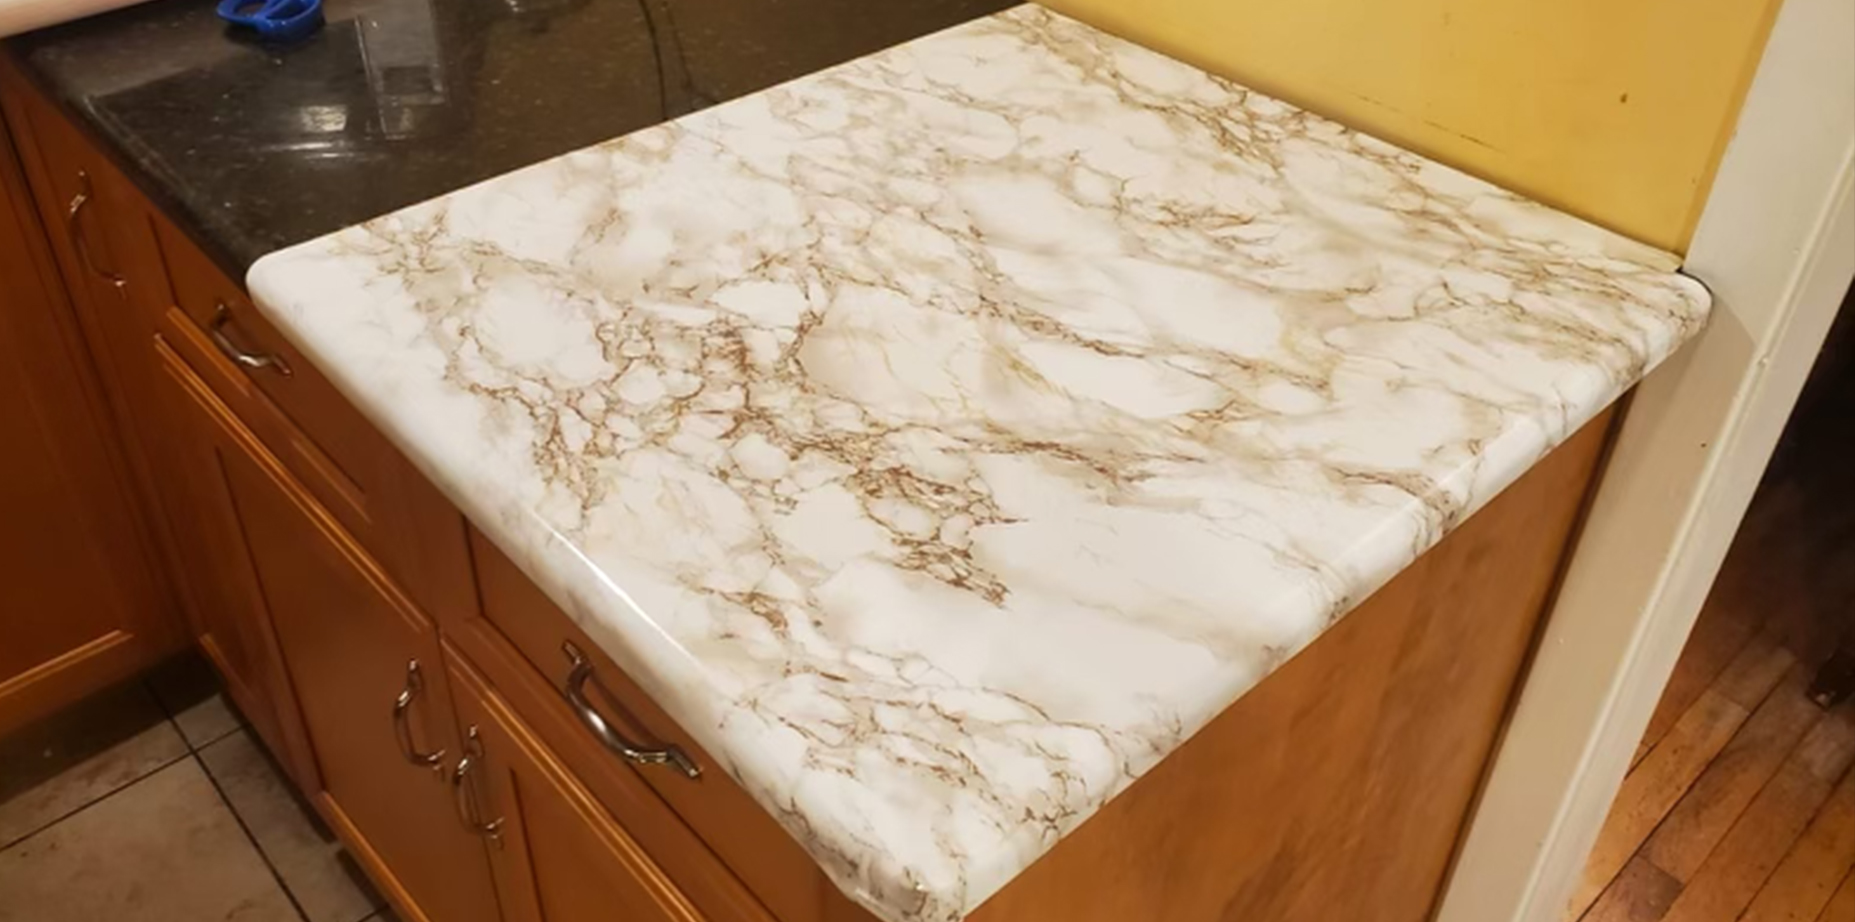 Kosher Dekal is coming back with a new design and formula for its counter top linings that caused a scandal last year after customers had trouble taking them off their counters. (Courtesy)